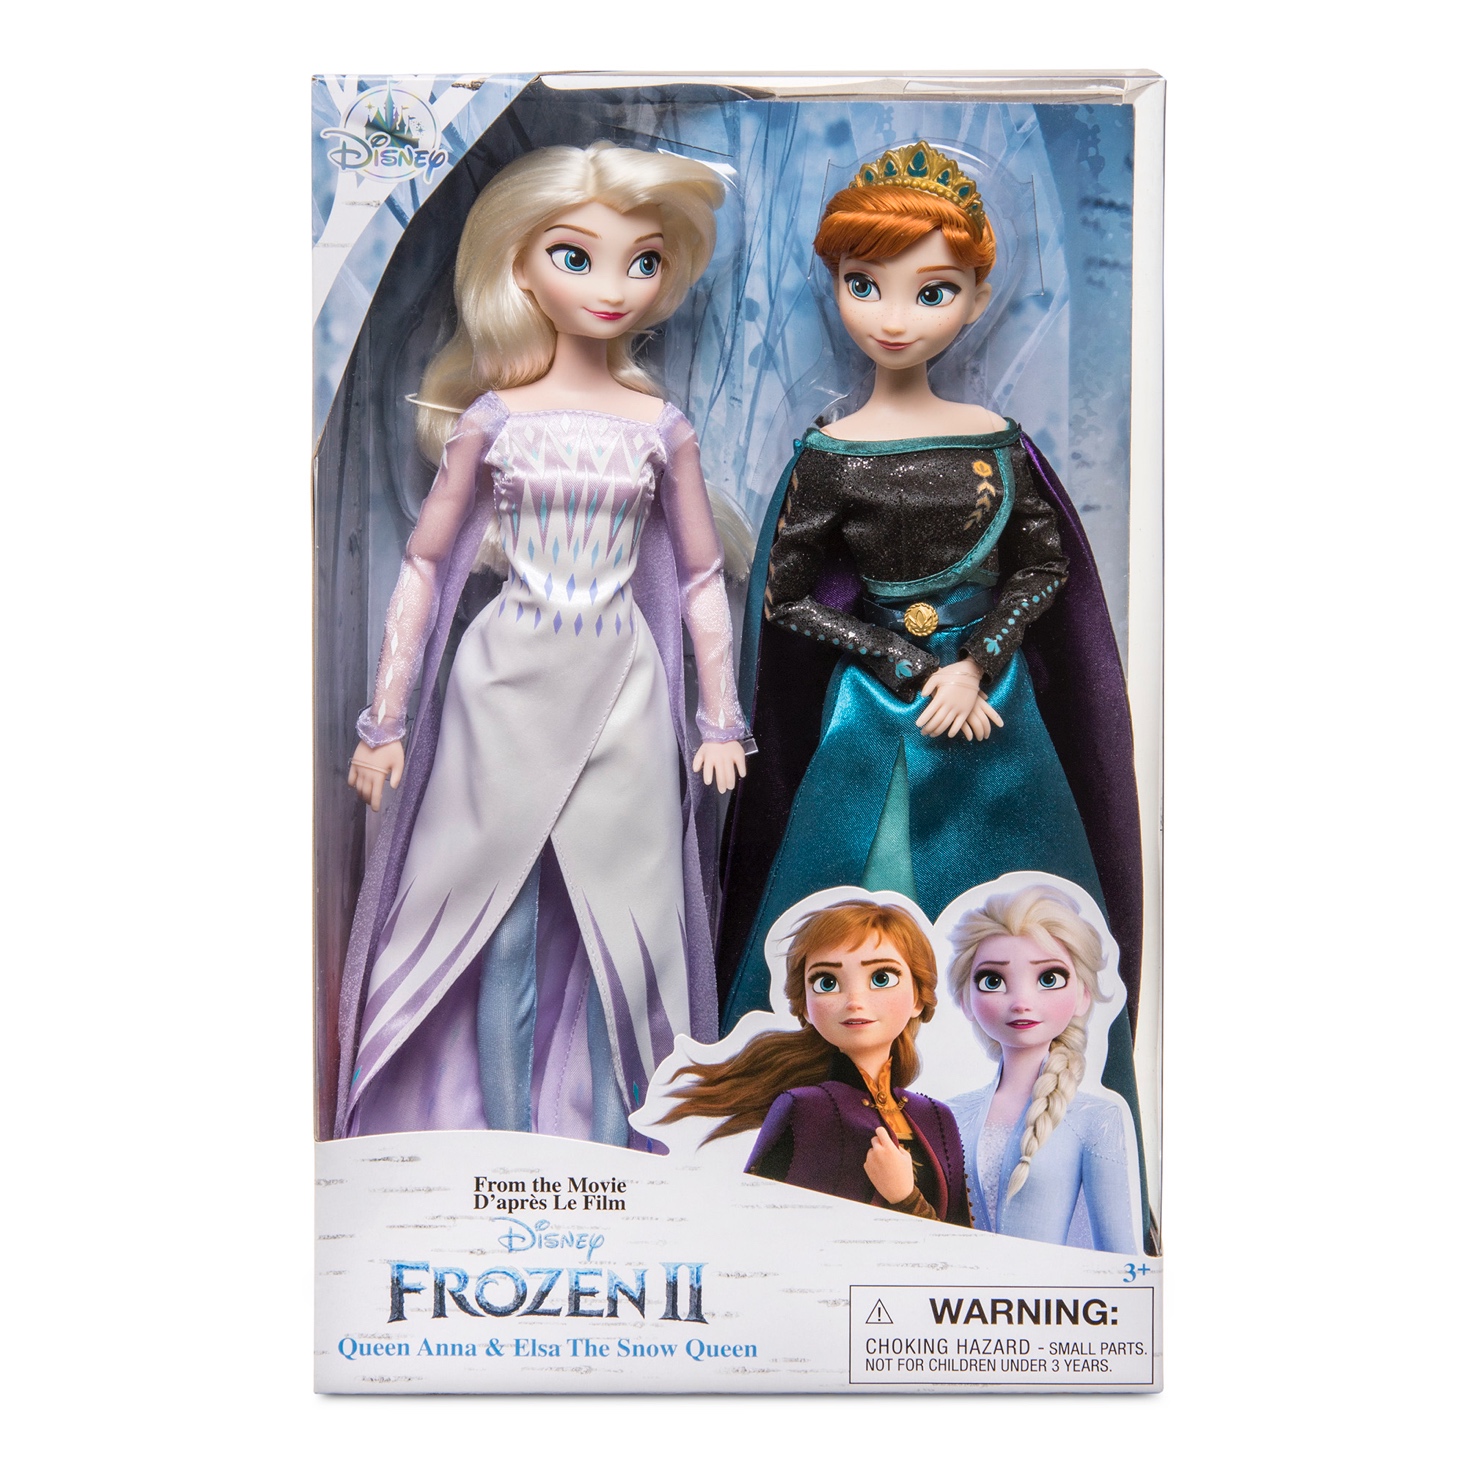 New Frozen 2 Doll Set and Costumes Available From Disney Store